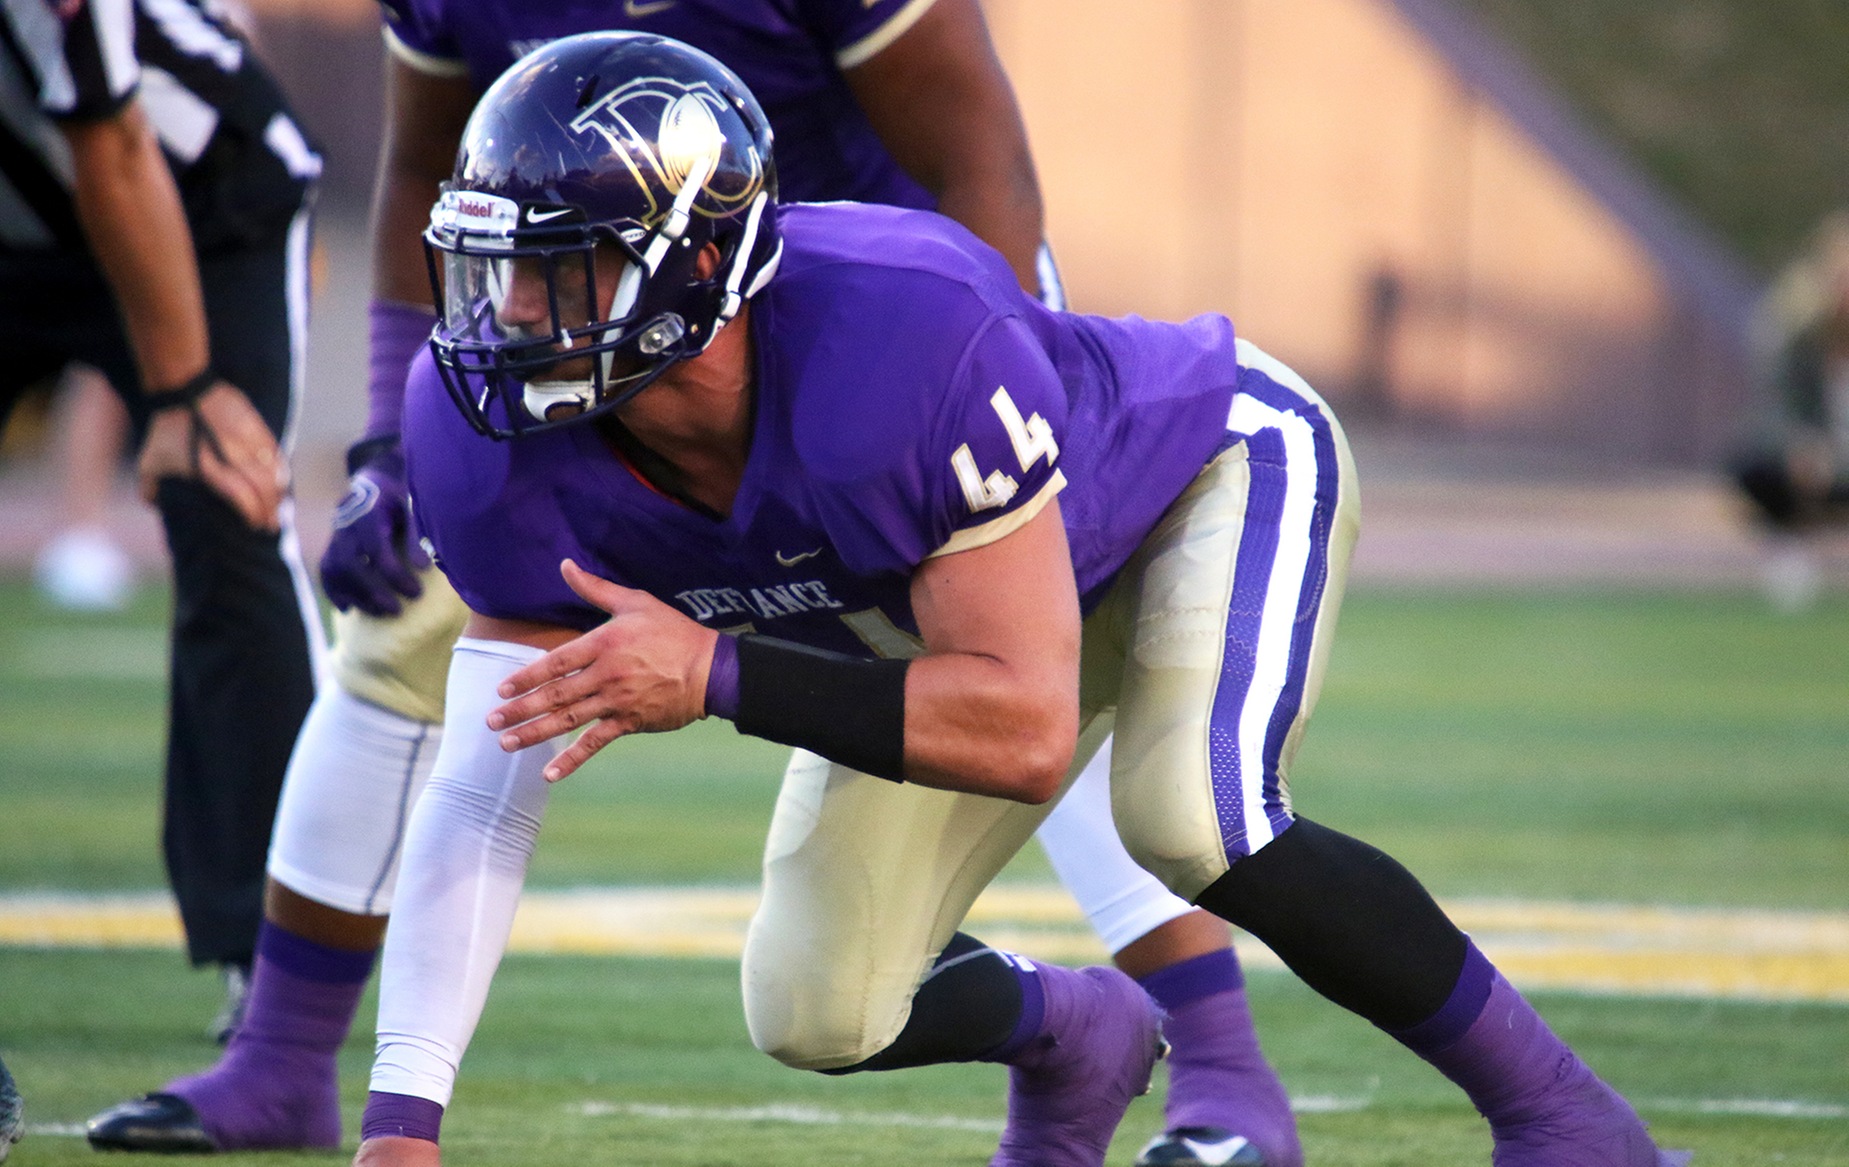 DeVore Named HCAC Defensive Player of the Week